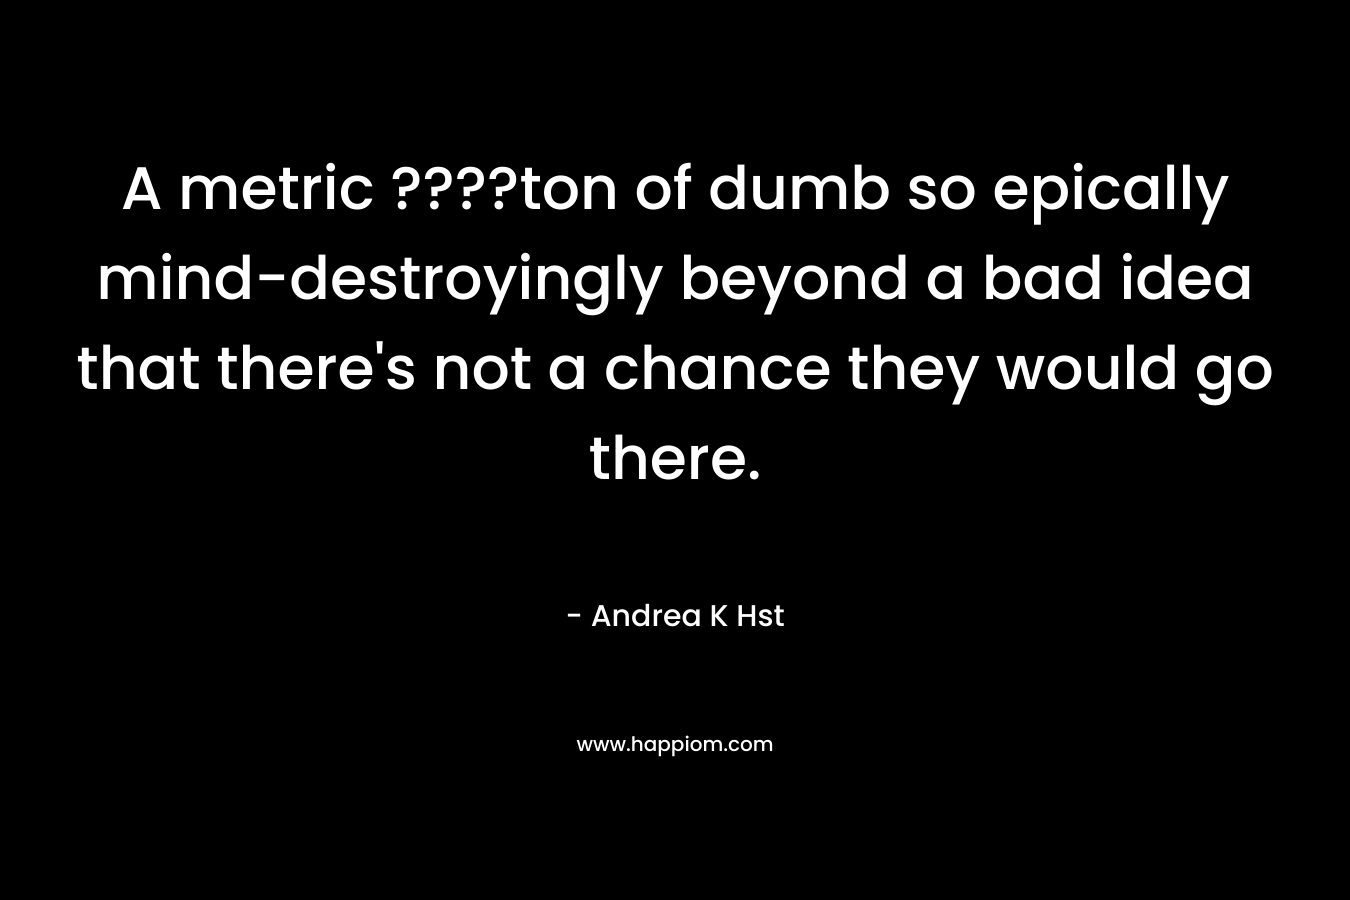 A metric ????ton of dumb so epically mind-destroyingly beyond a bad idea that there’s not a chance they would go there. – Andrea K Hst